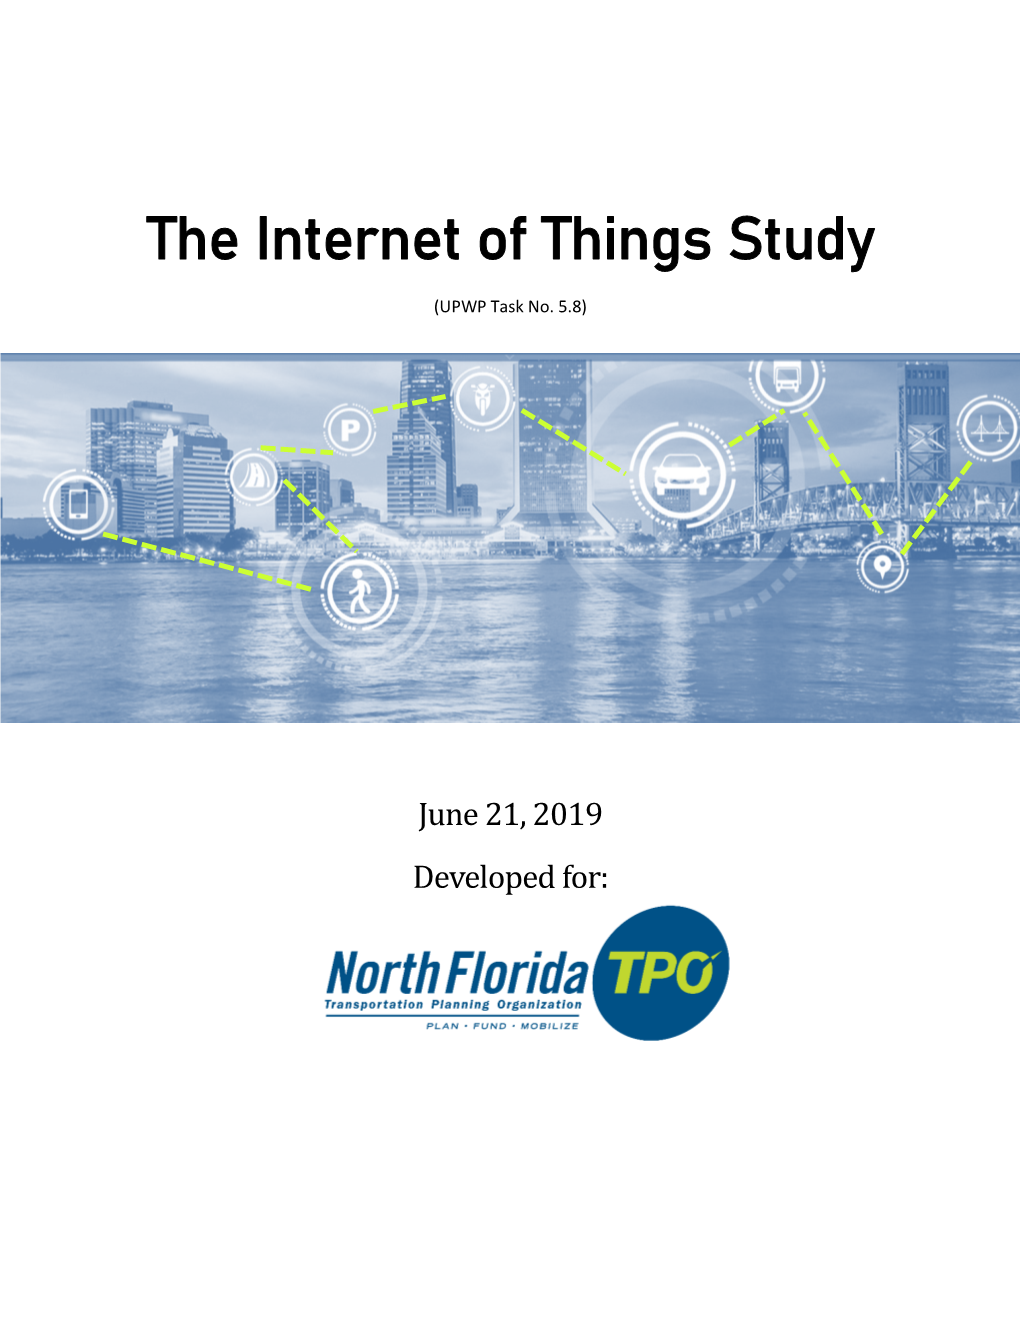 The Internet of Things Study